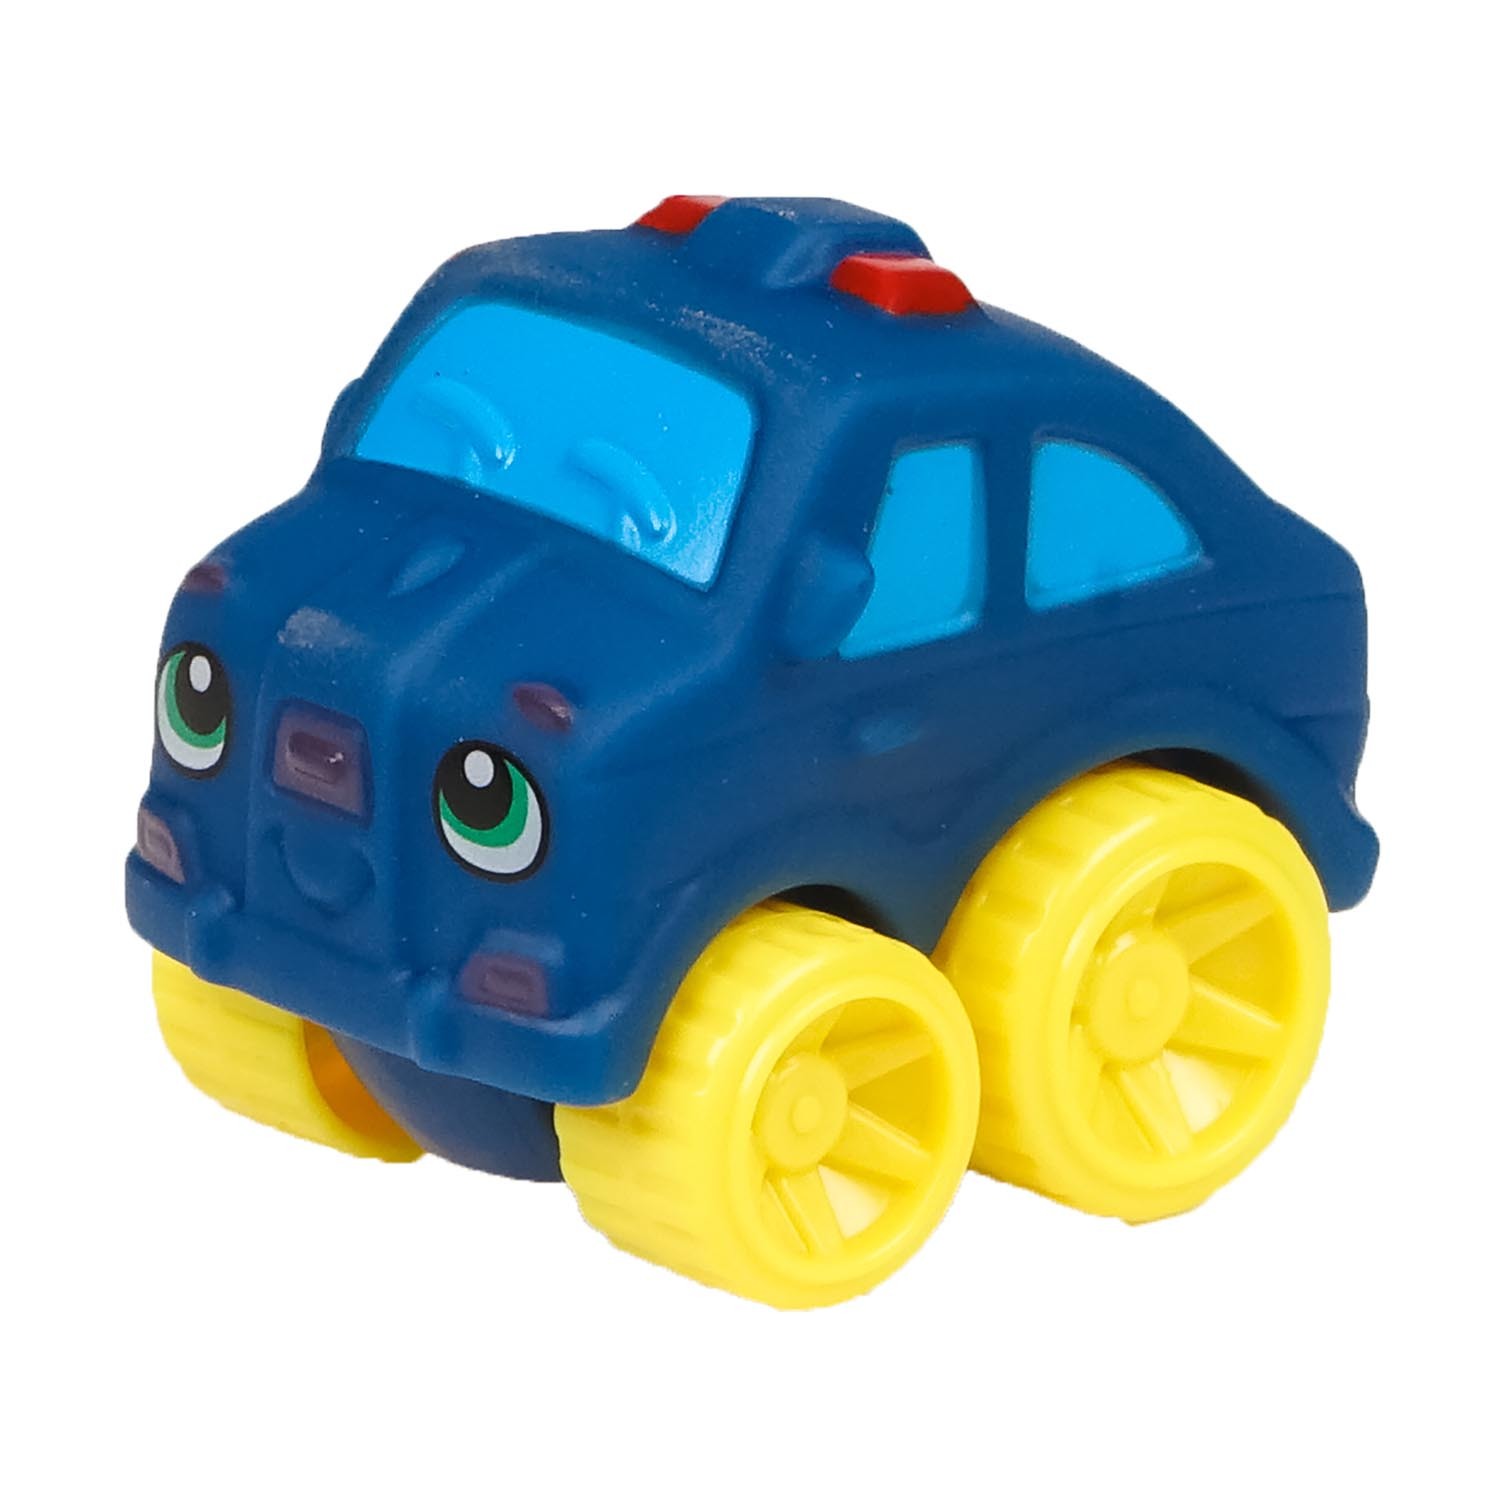 Cute Vehicle Toy 5 Pack in Assorted styles Image 3